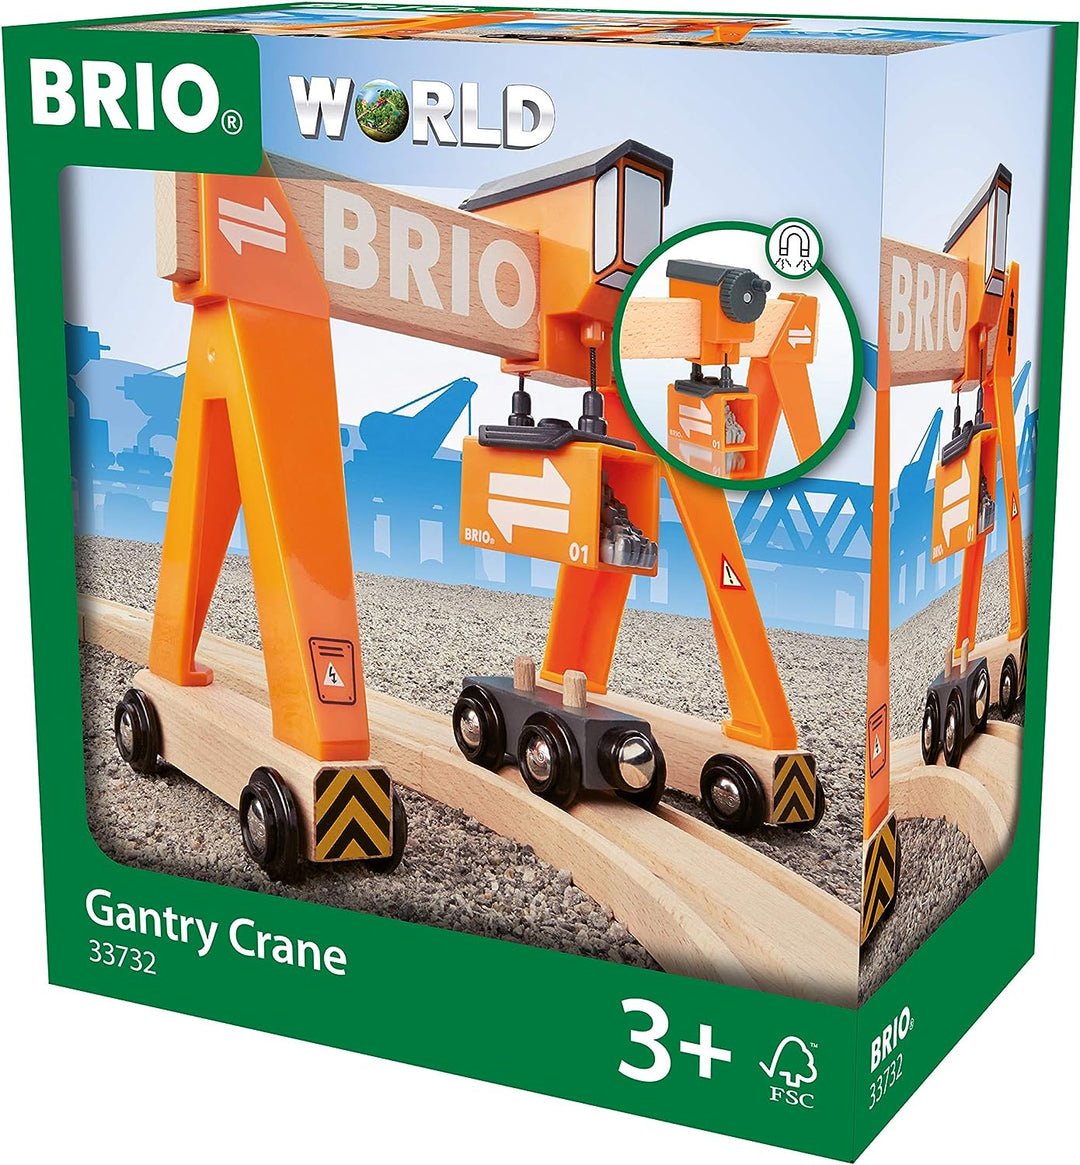 BRIO World Harbour Gantry Crane for Kids Age 3 Years Up - Compatible with all BRIO Railway Train Sets & Accessories